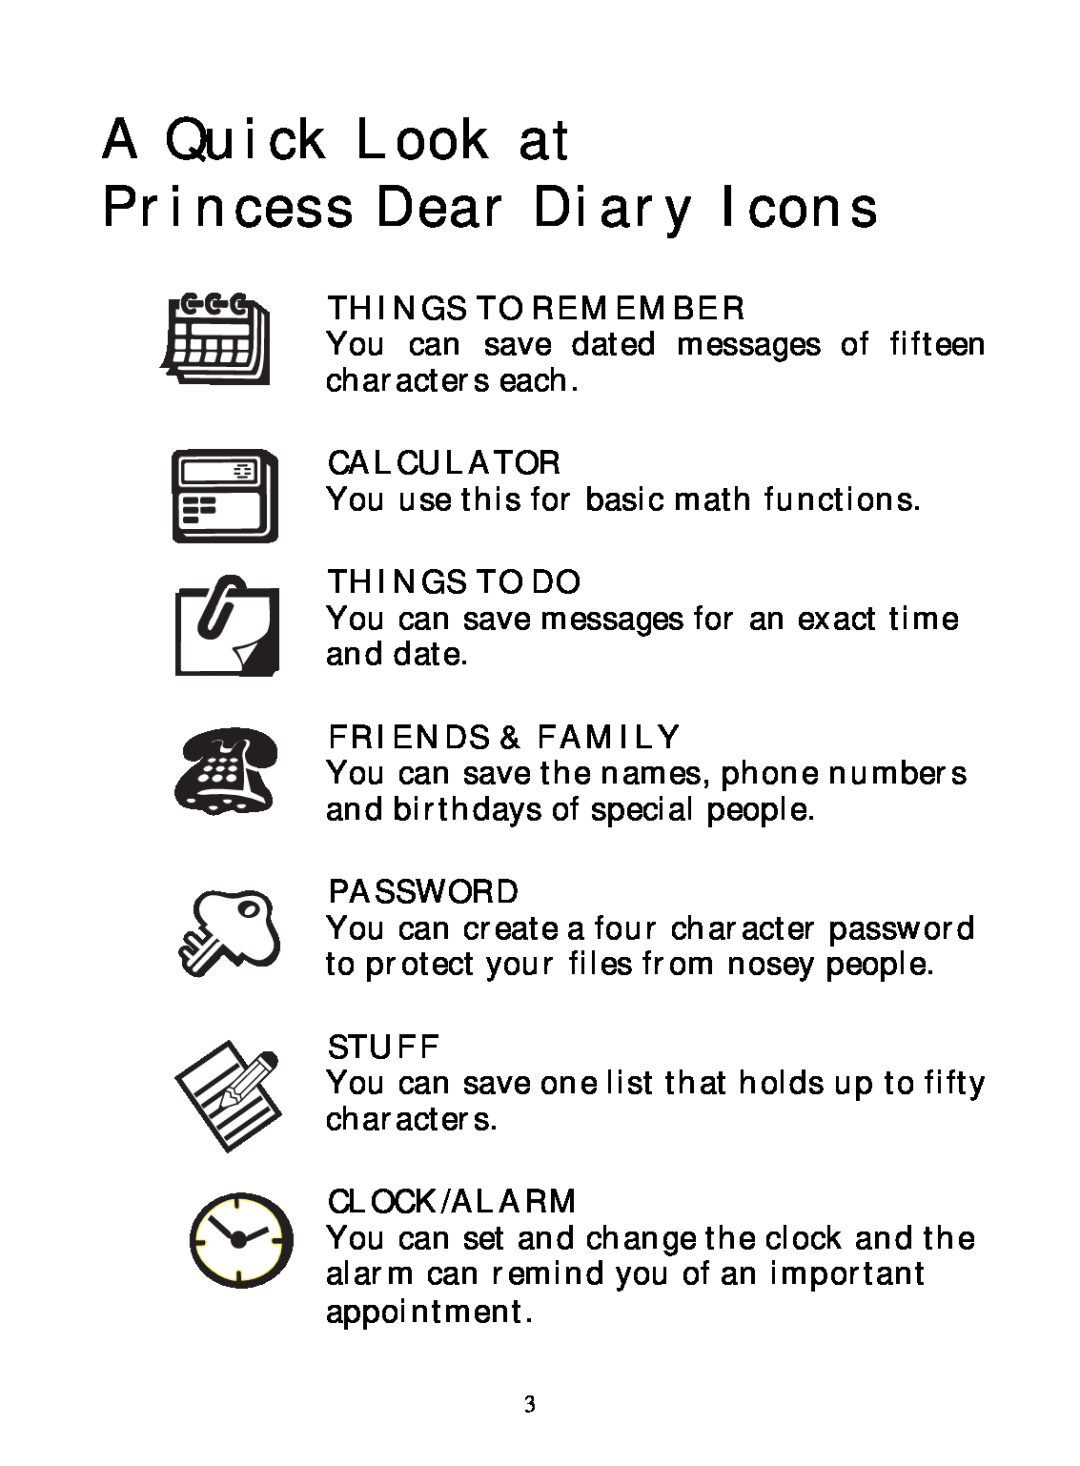 Hasbro 71-554 A Quick Look at Princess Dear Diary Icons, Things To Remember, Calculator, Things To Do, Friends & Family 